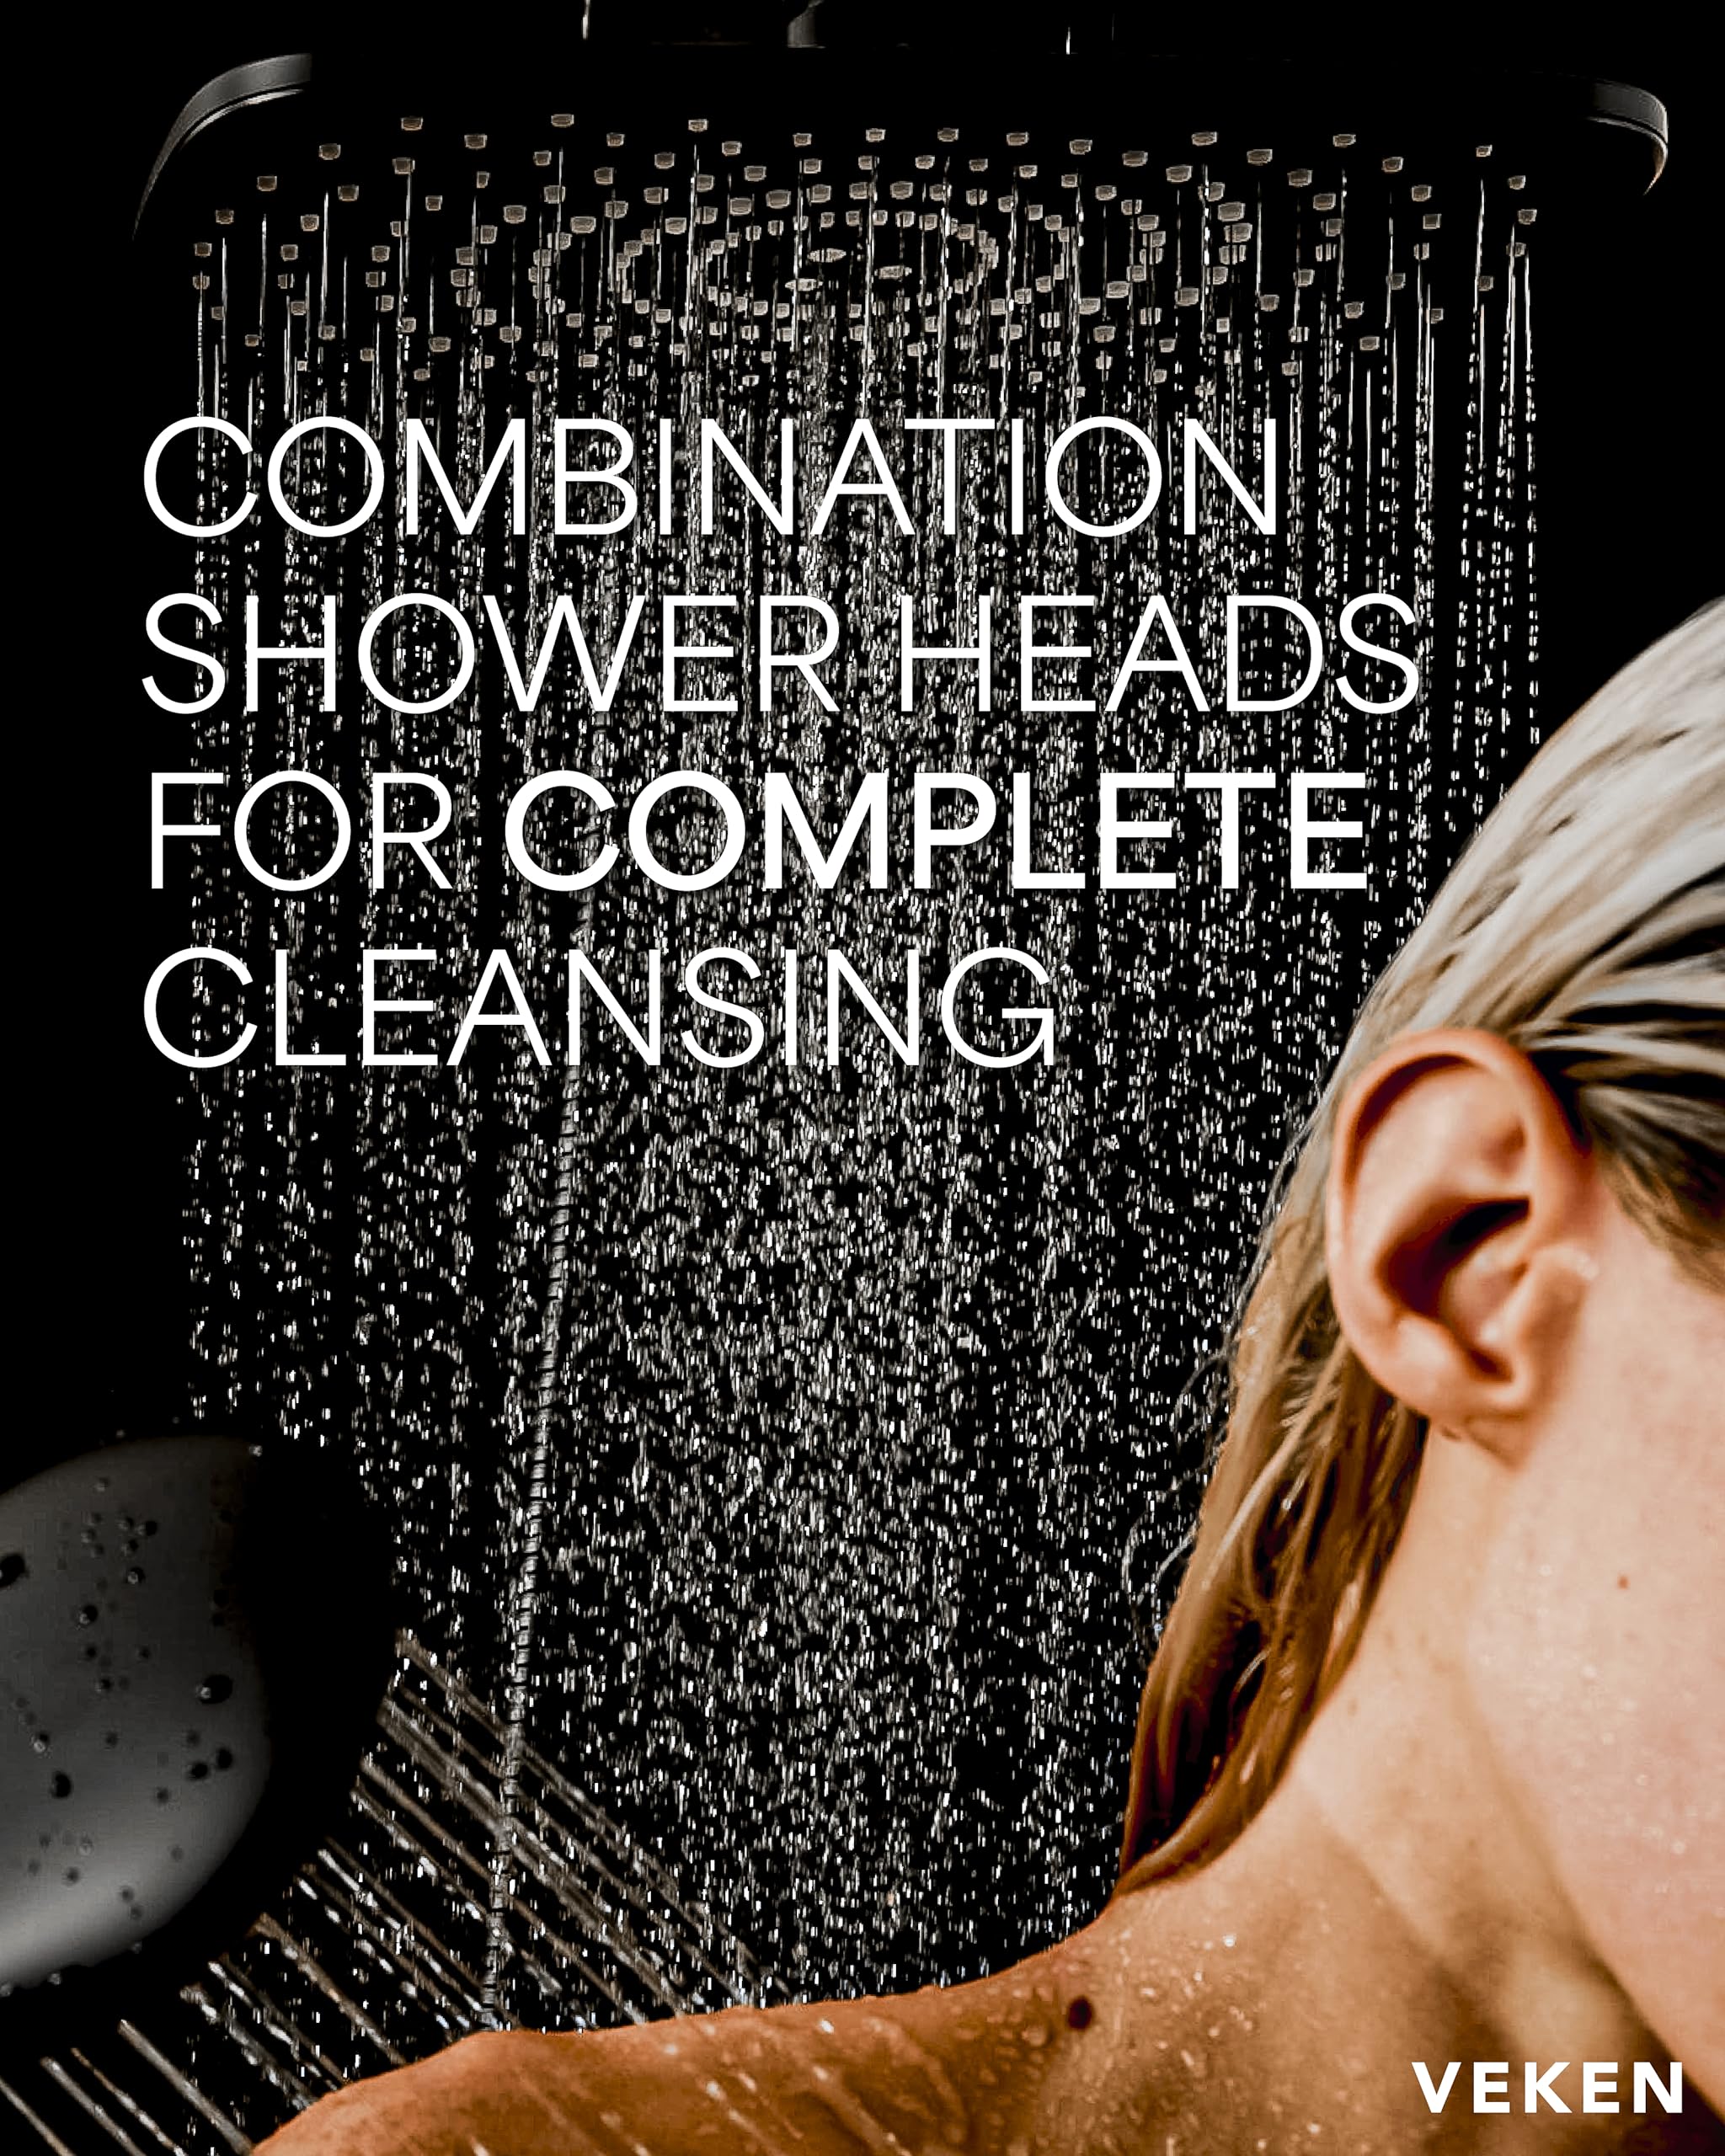 Veken 12 Inch High Pressure Rain Shower Head Combo with Extension Arm- Wide Rainfall Showerhead with 5 Handheld Water Spray - Adjustable Dual Showerhead with Anti-Clog Nozzles - Matte Black